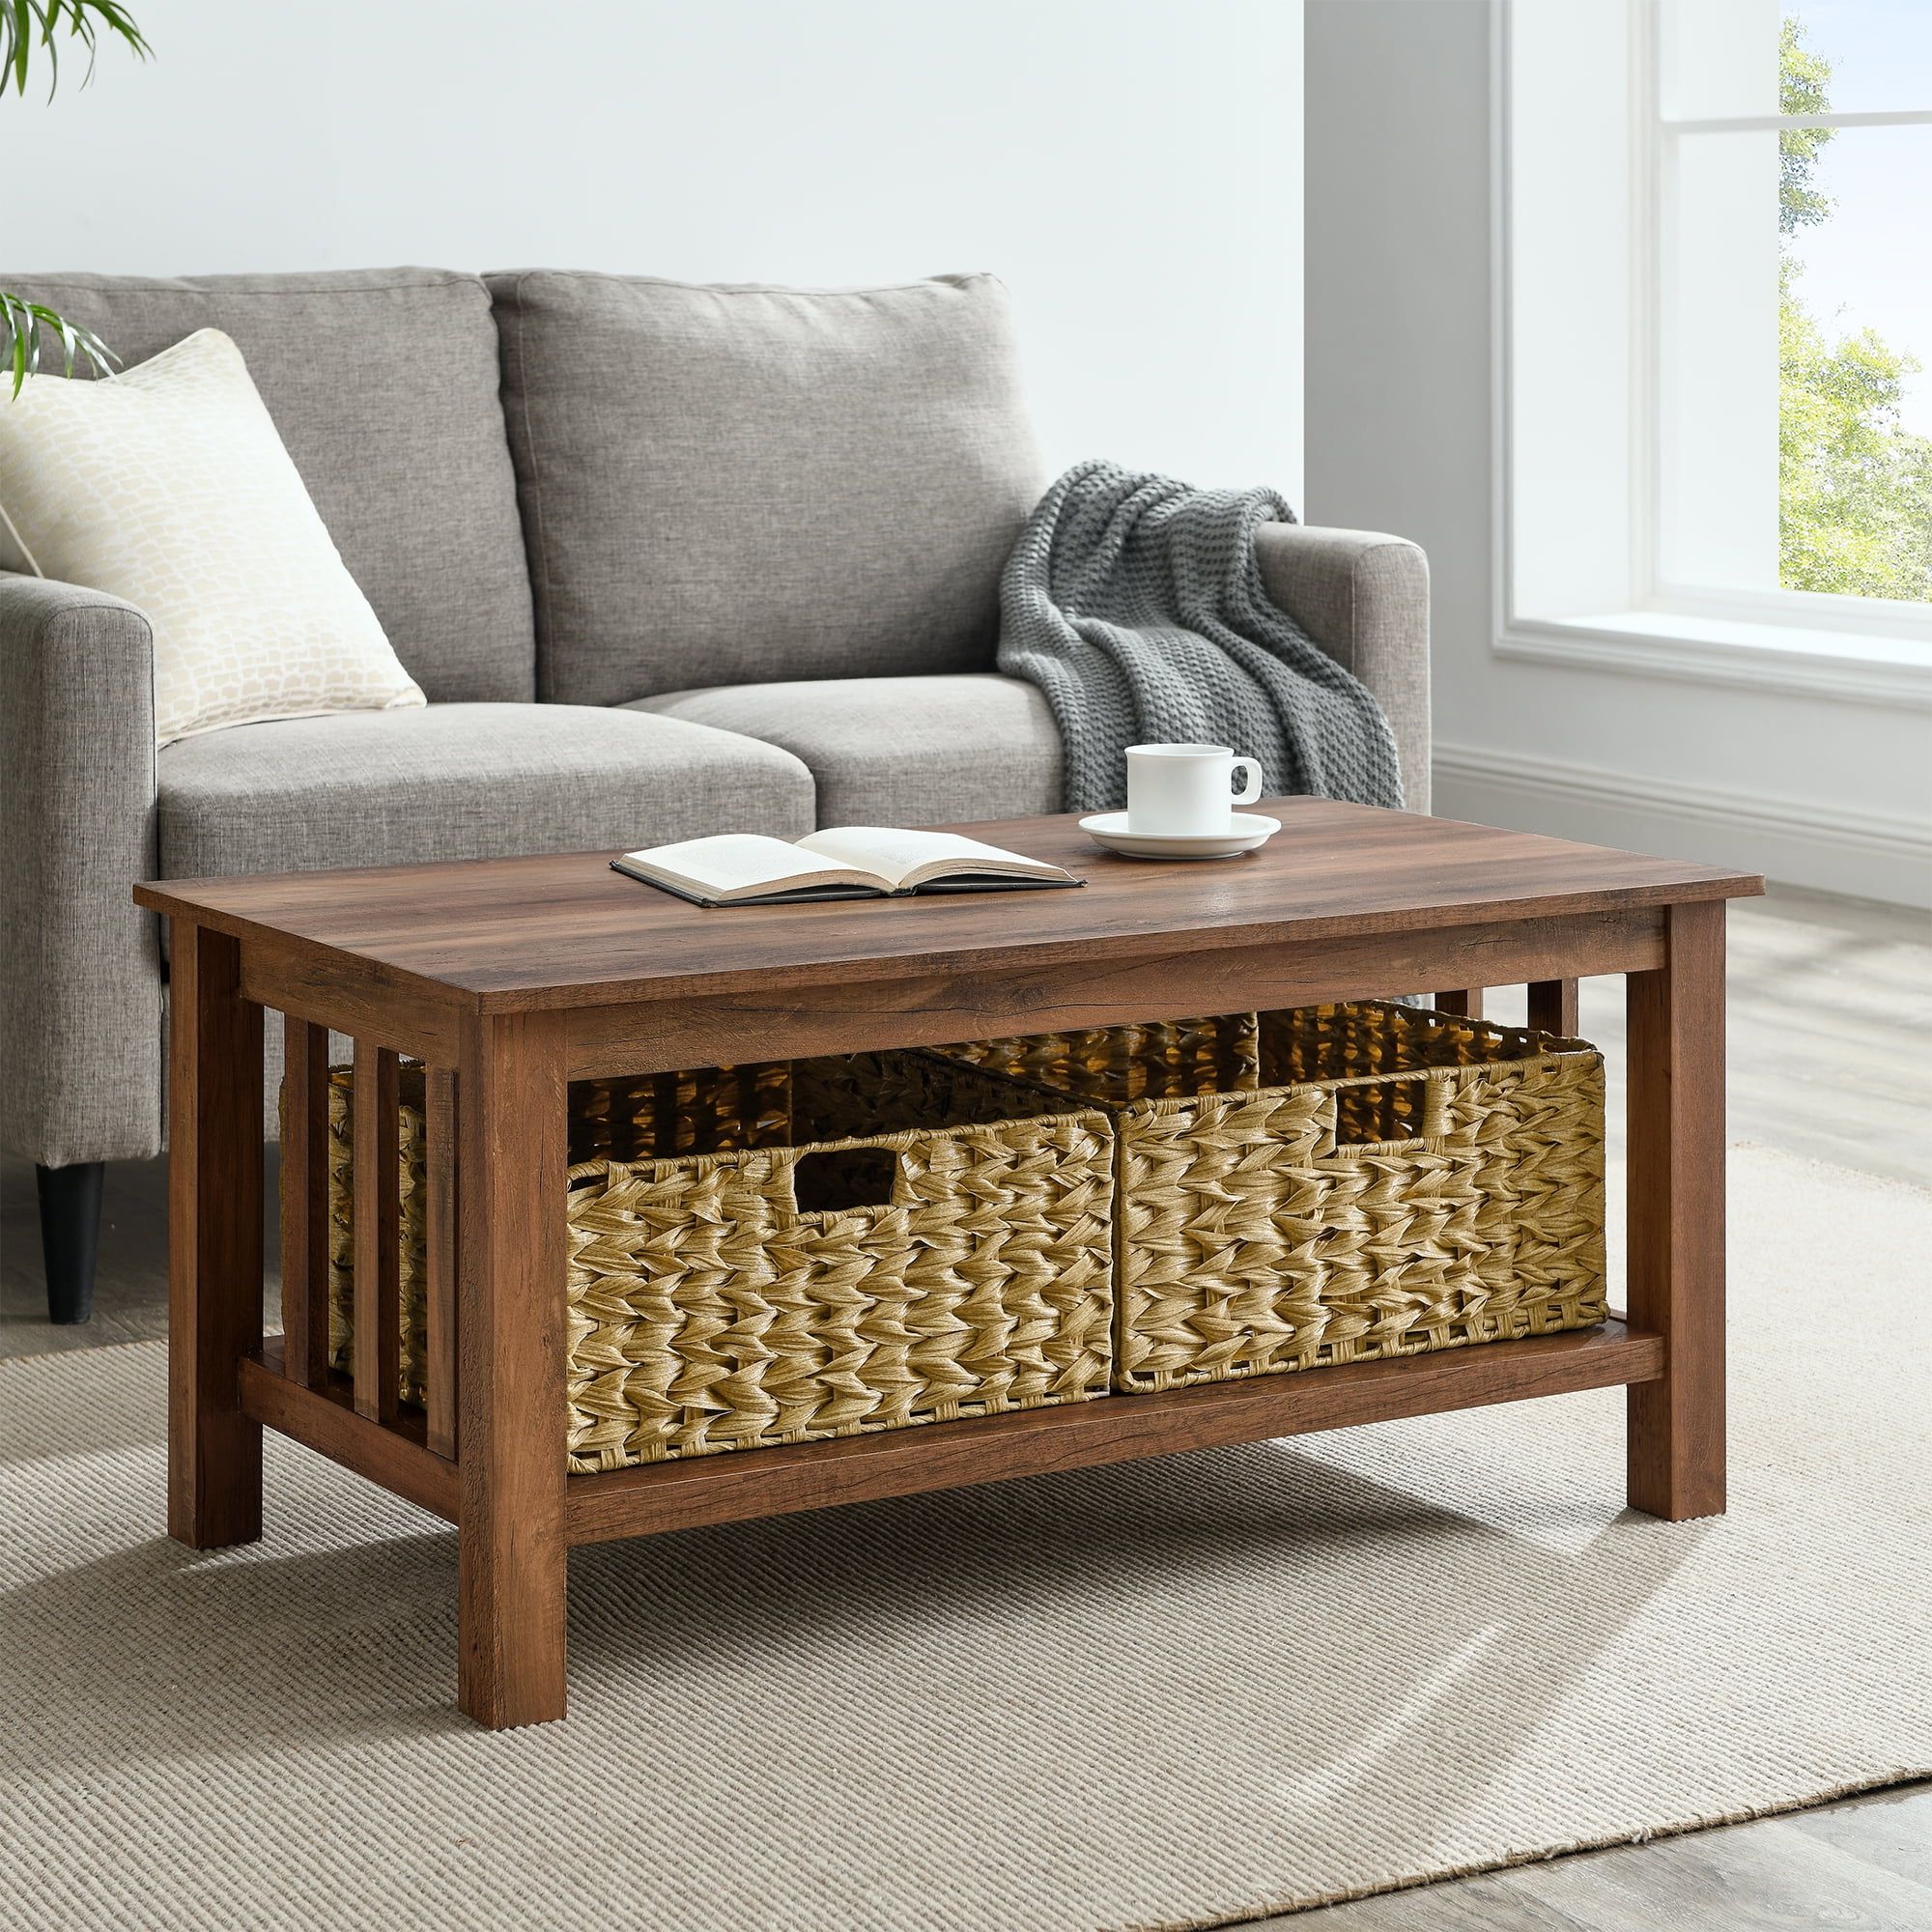 Woven Paths Farmhouse Mission Rectangle Coffee Table With Baskets With Woven Paths Coffee Tables (Gallery 4 of 20)